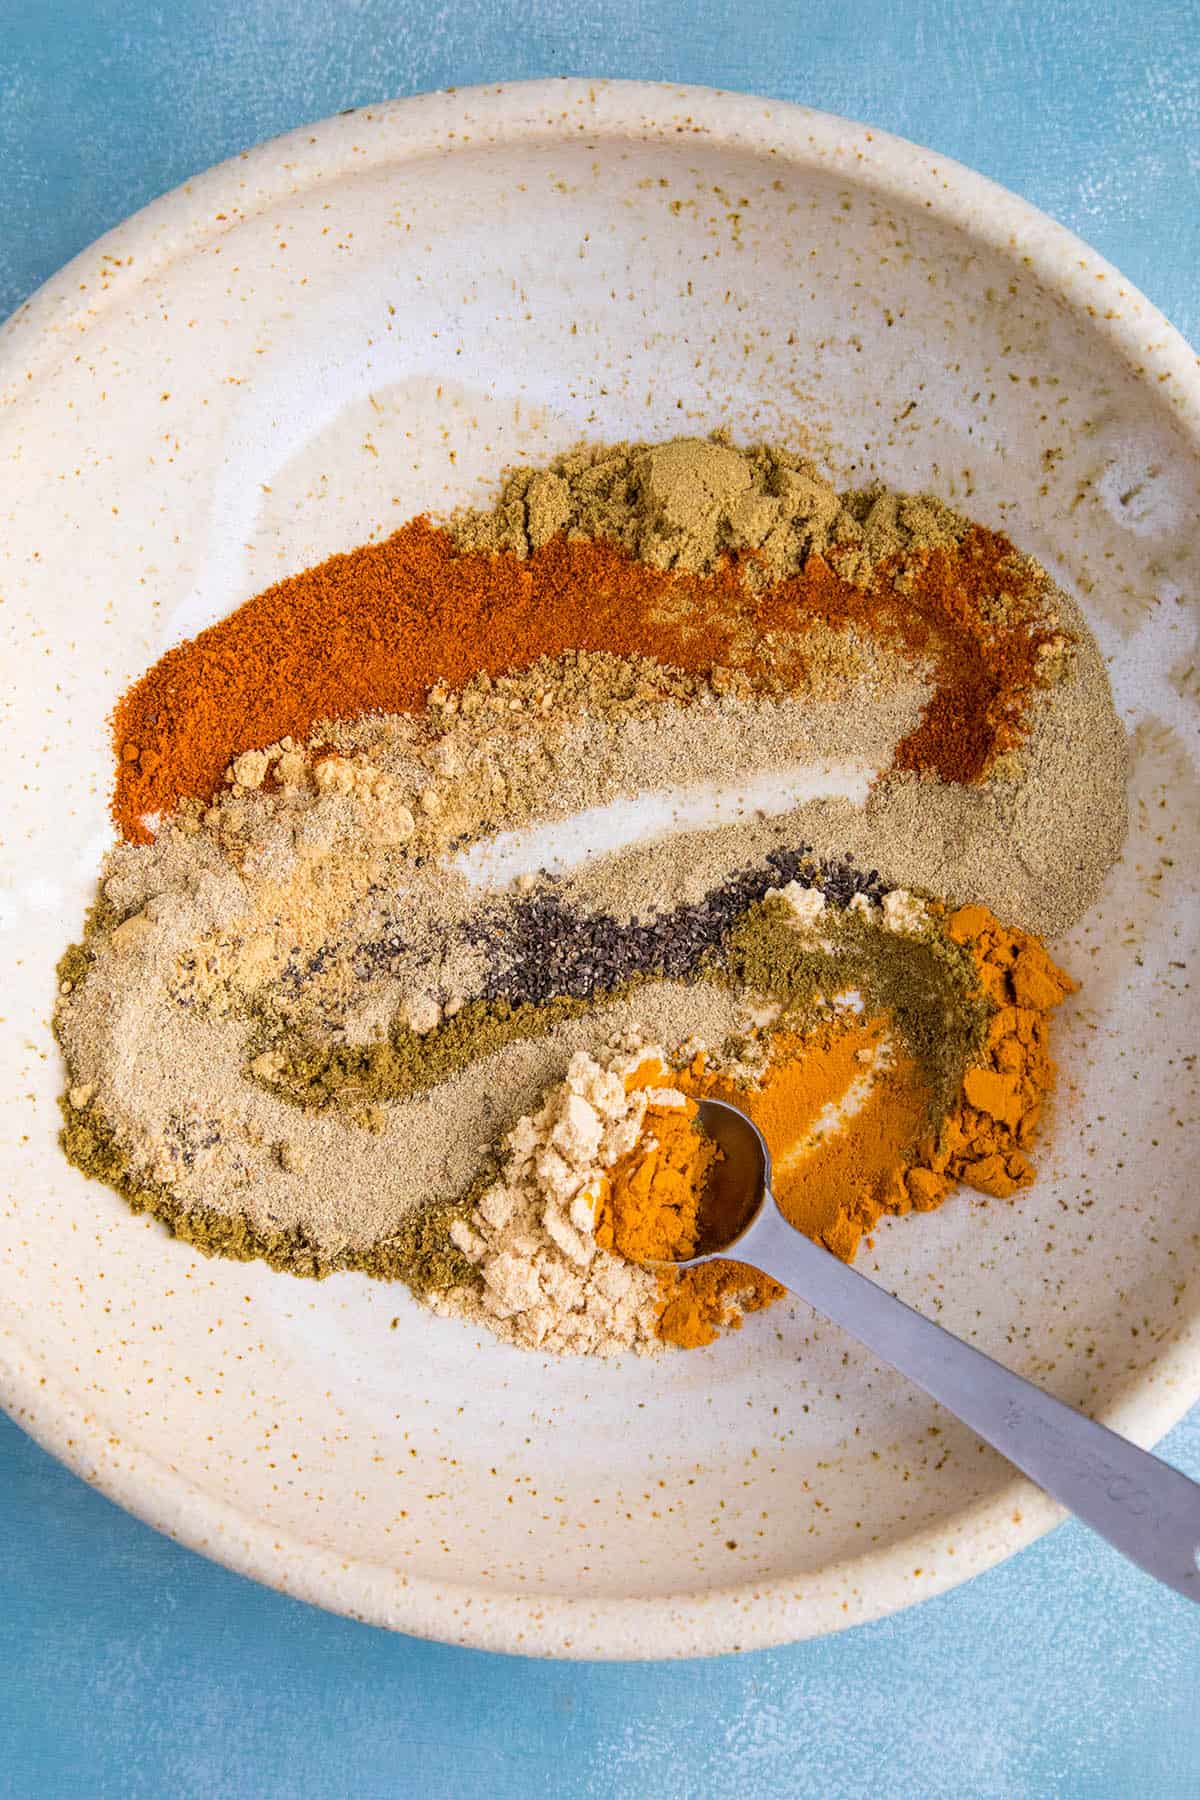 Mixing up my homemade Curry Powder